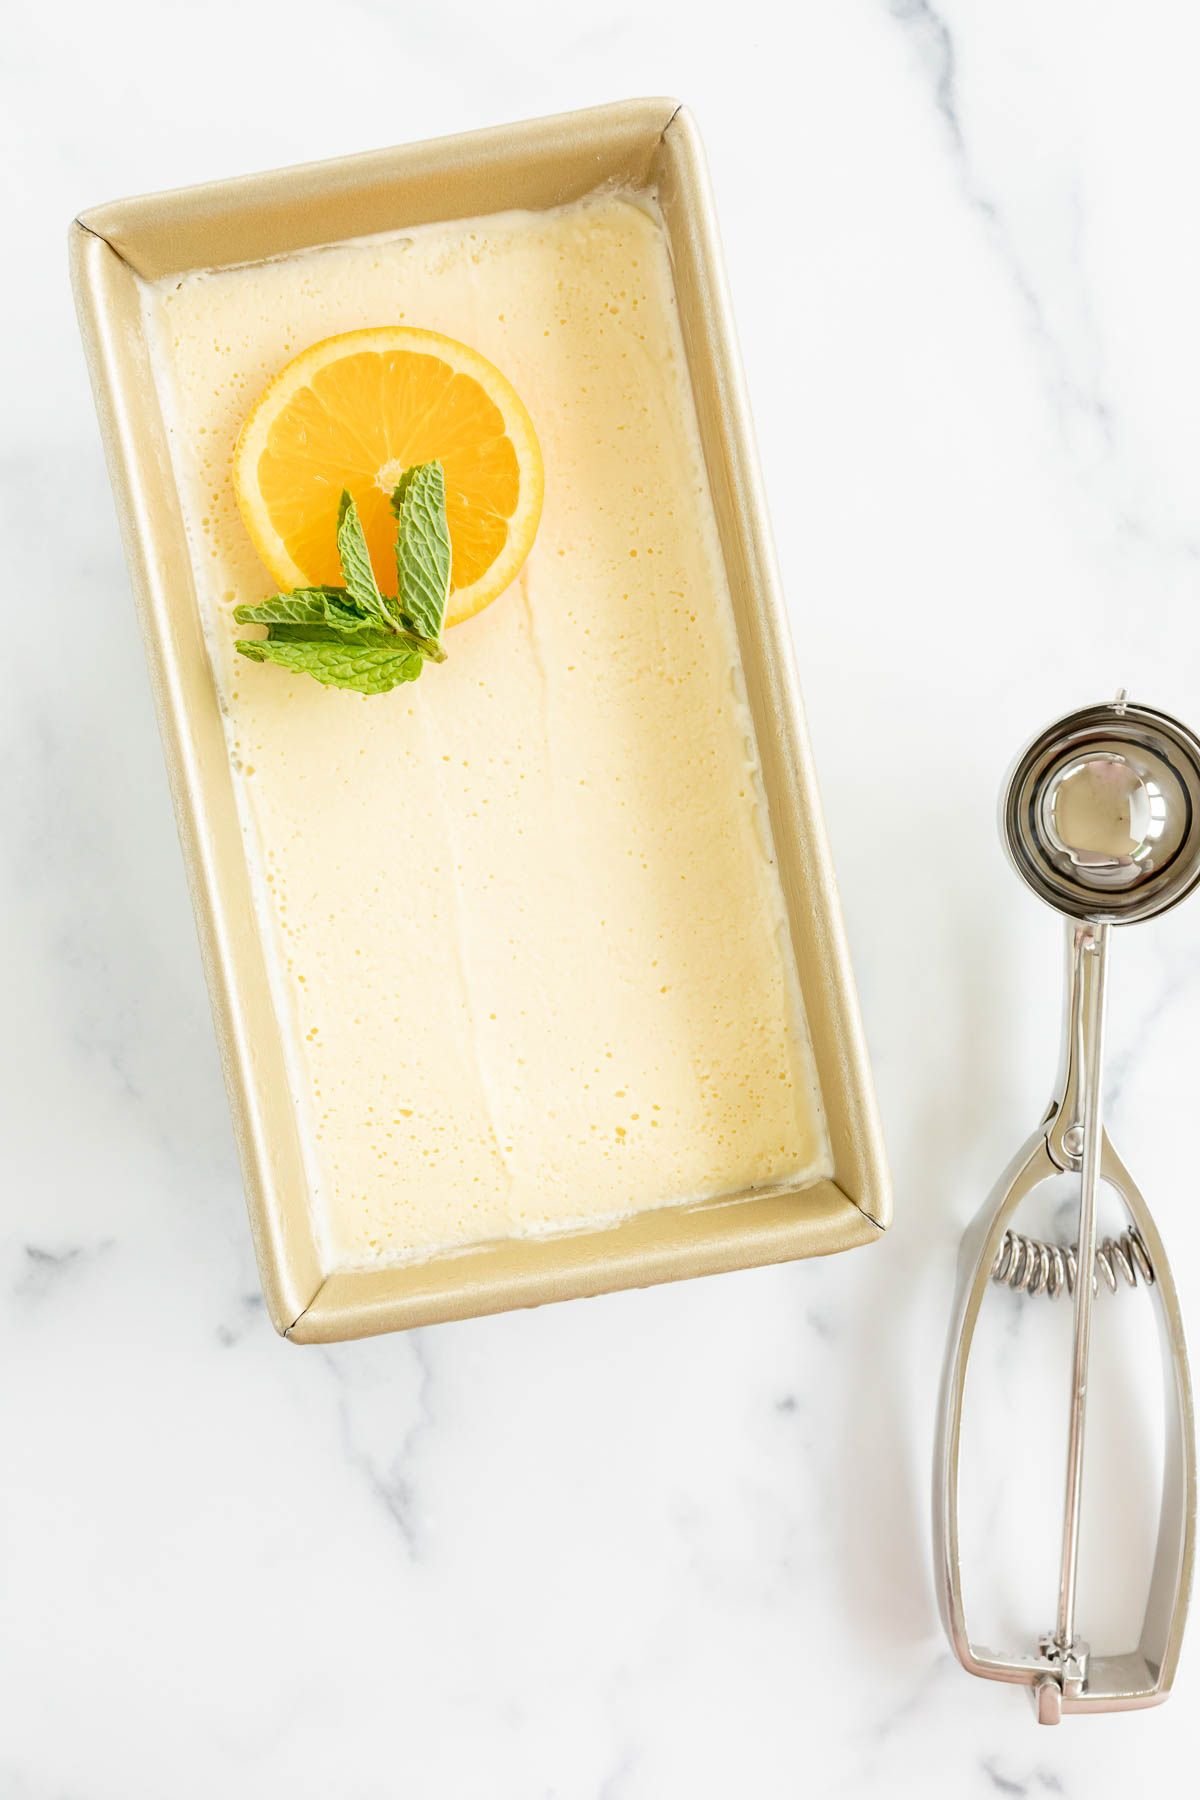 Homemade orange sherbet in a gold loaf pan, with an ice cream scoop